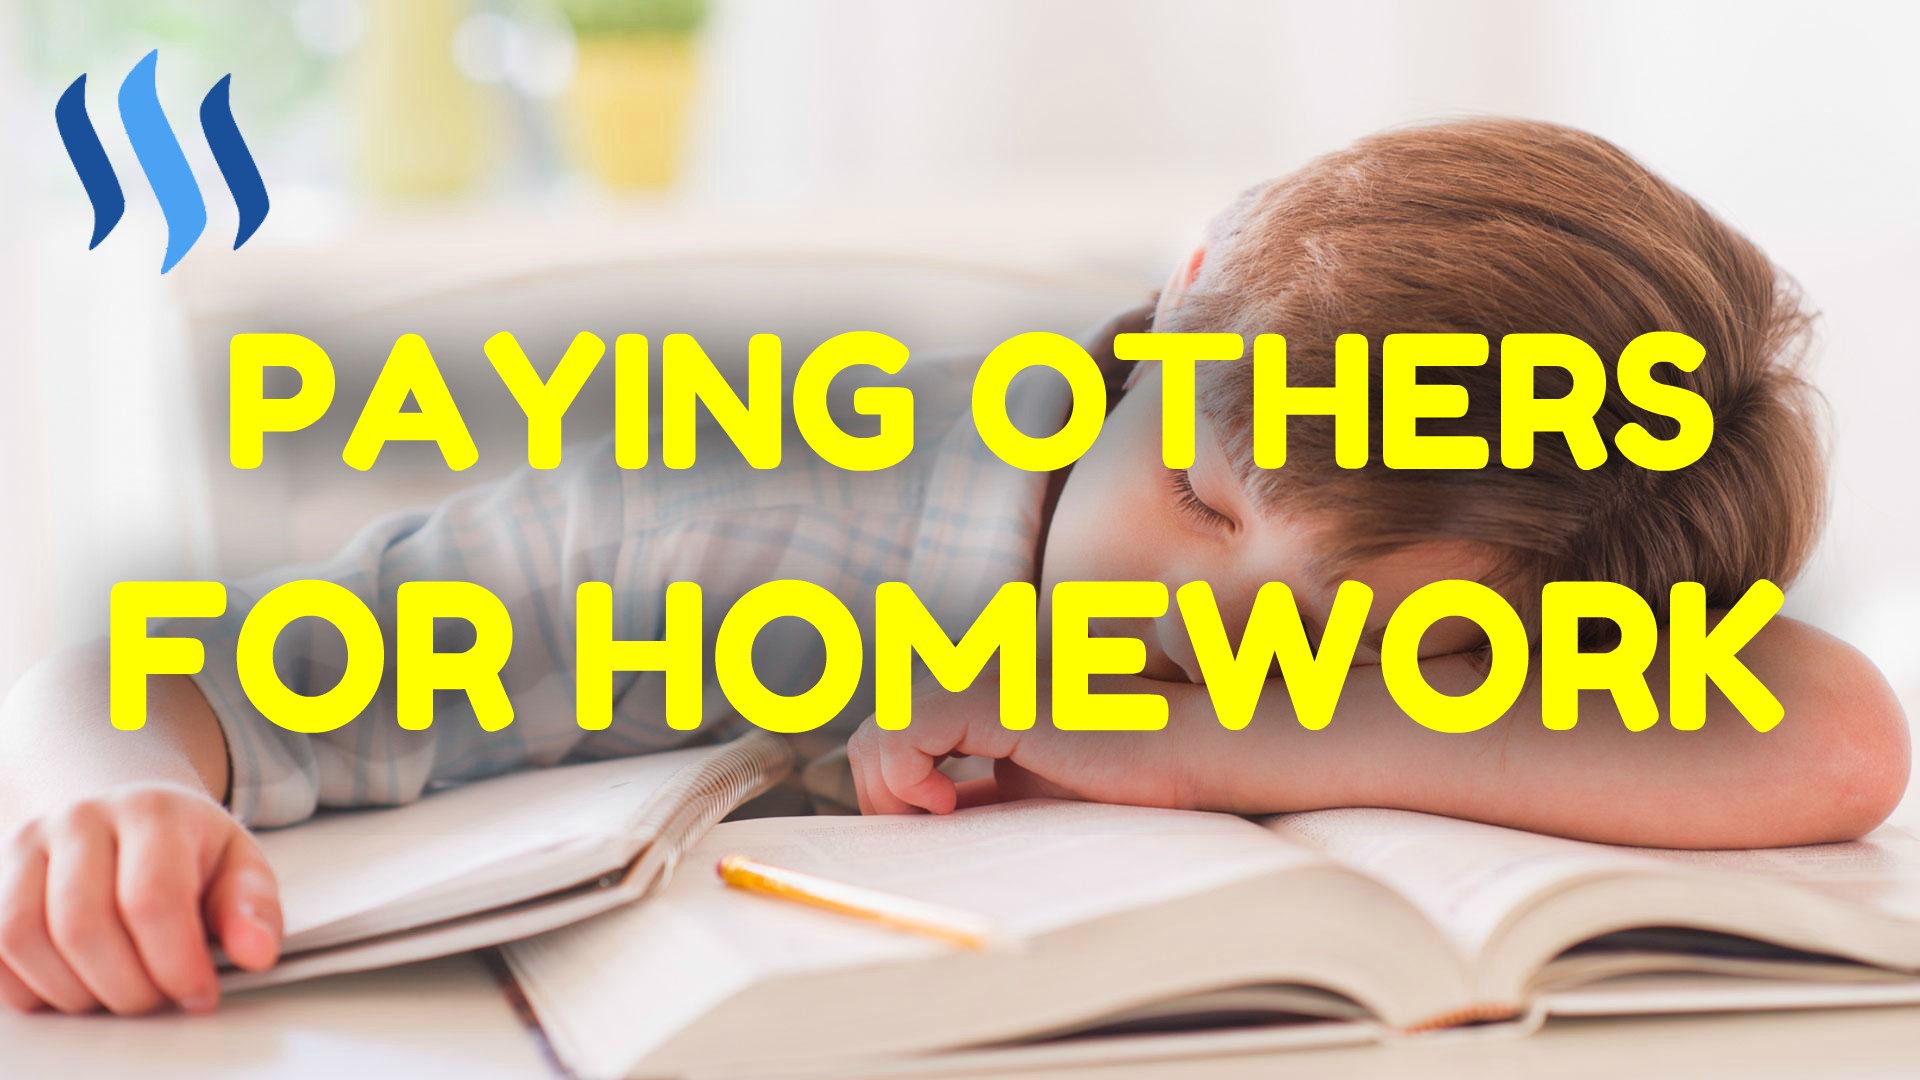 Pay For Homework at a Low Price ($10/page) @ Hire Writers